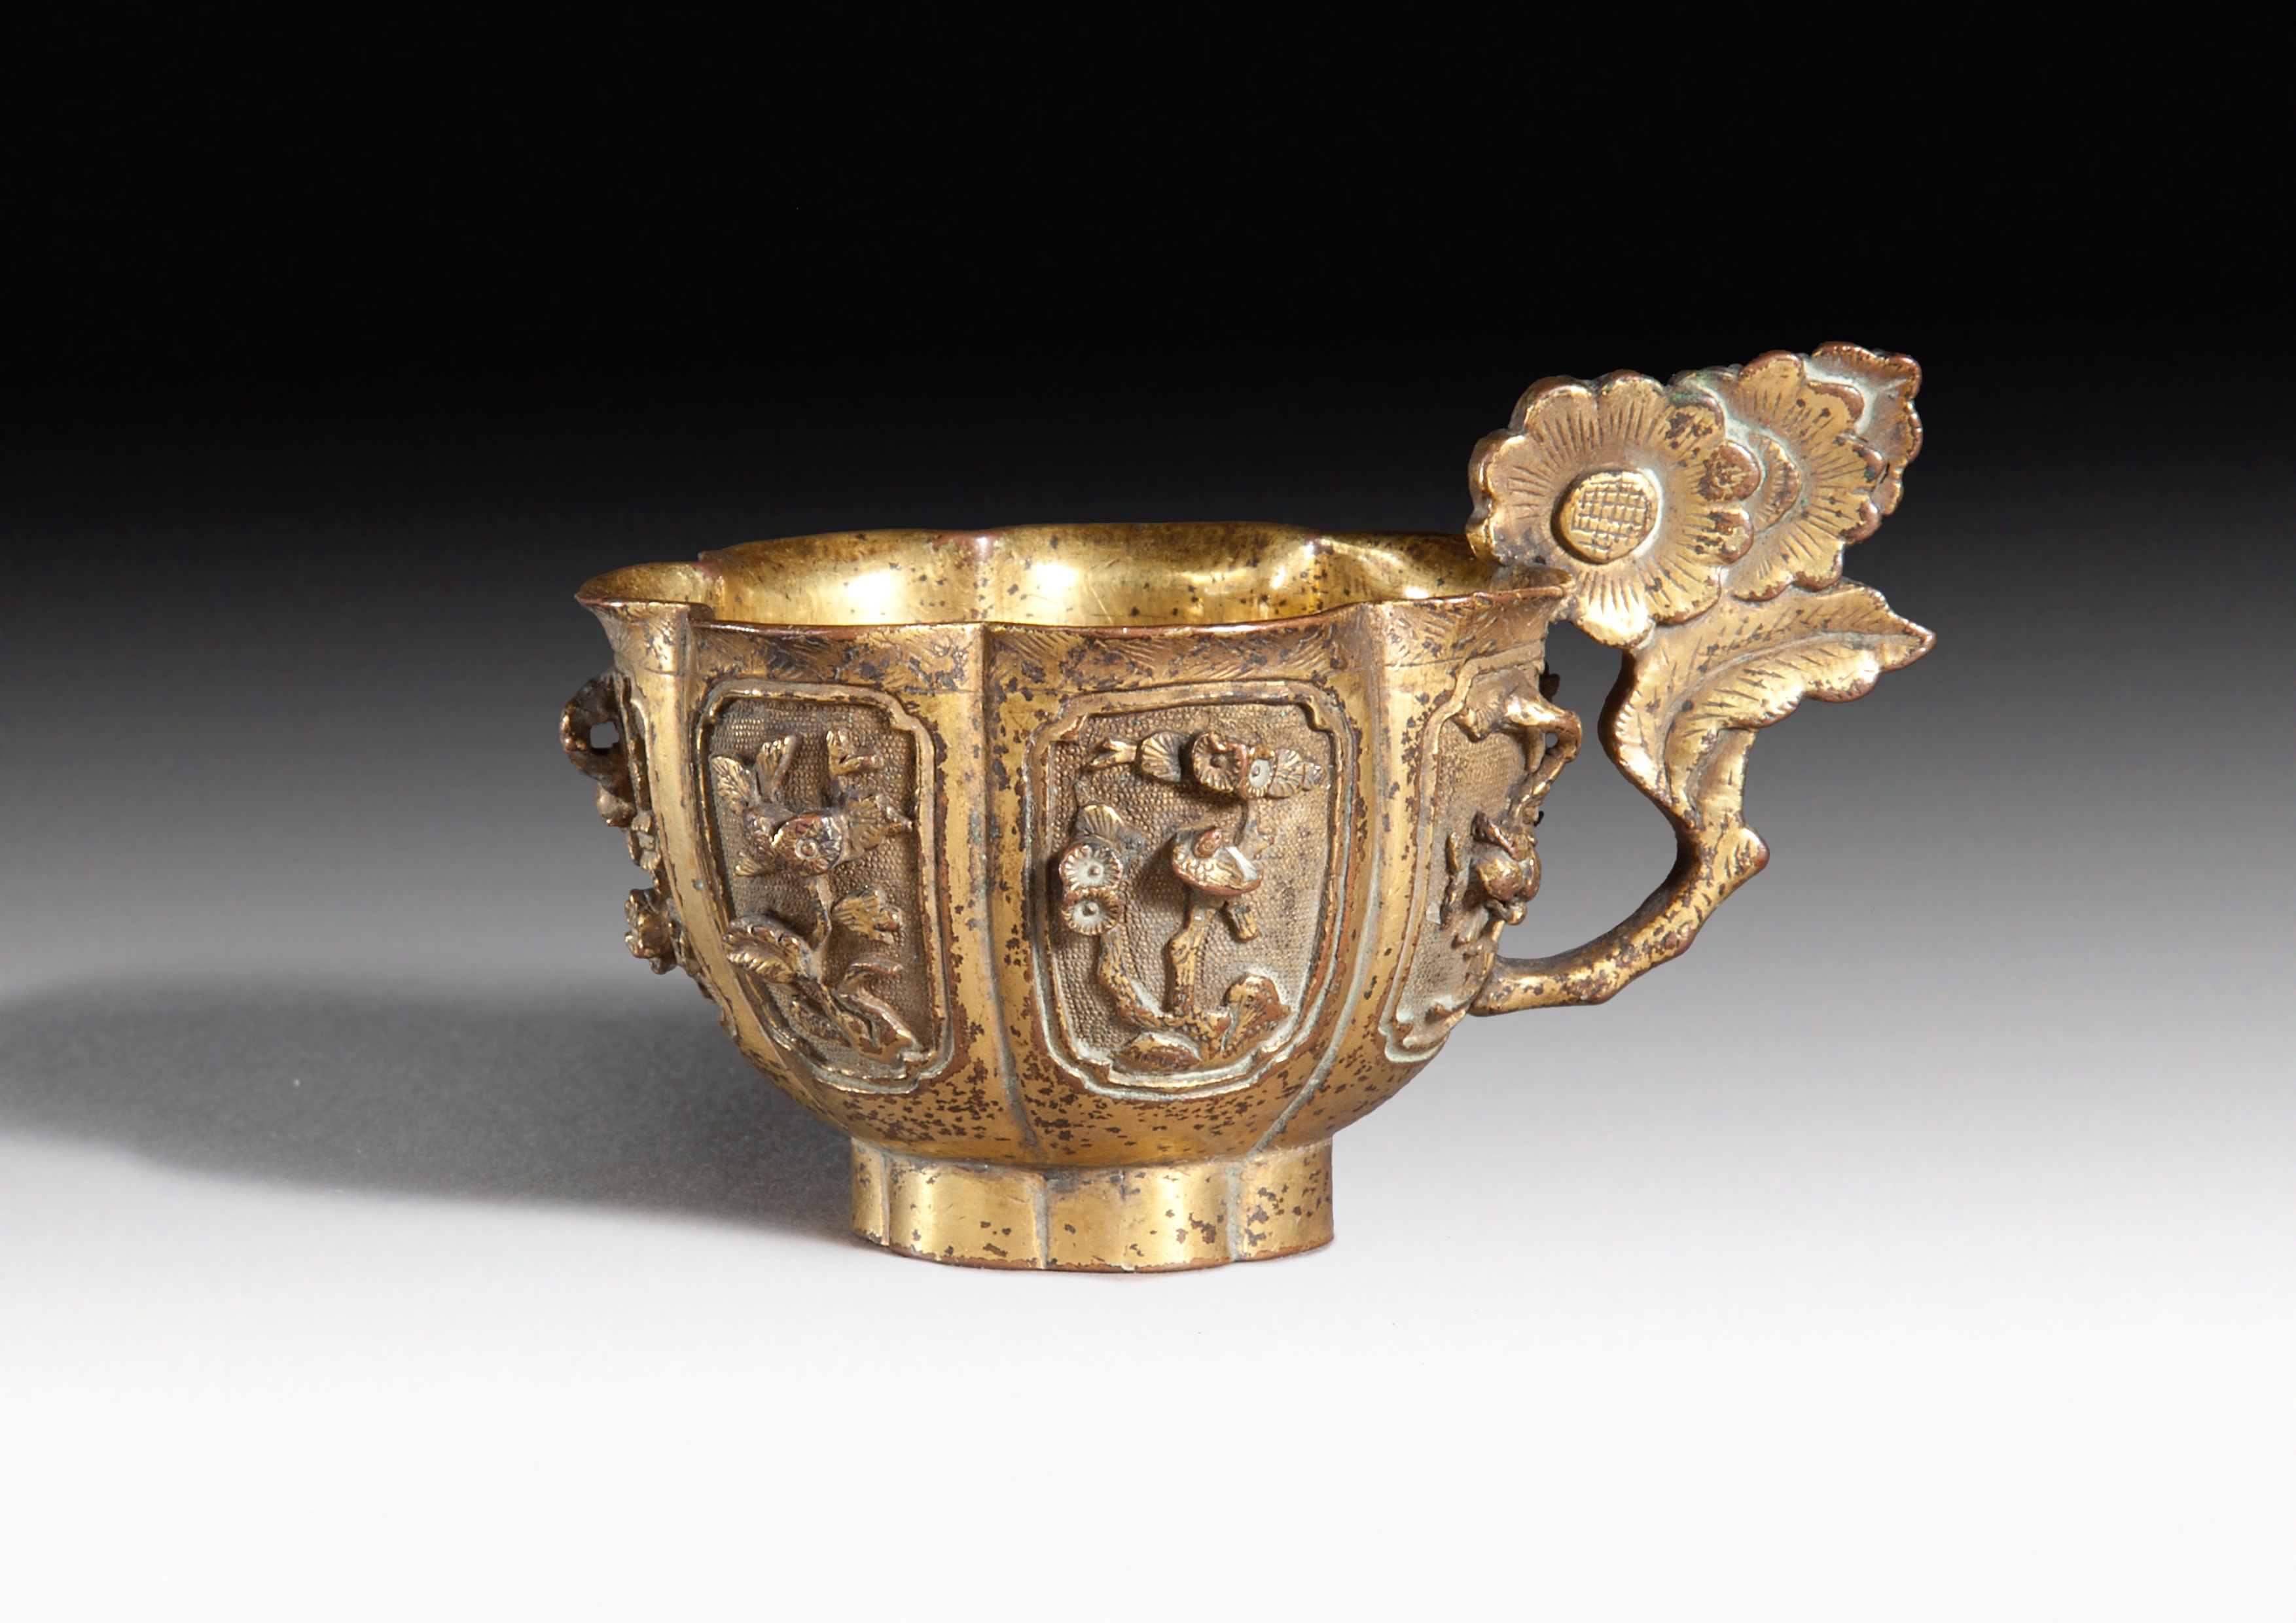 A SMALL CHINESE GILT-BRONZE CUP, QING DYNASTY, 17TH CENTURY